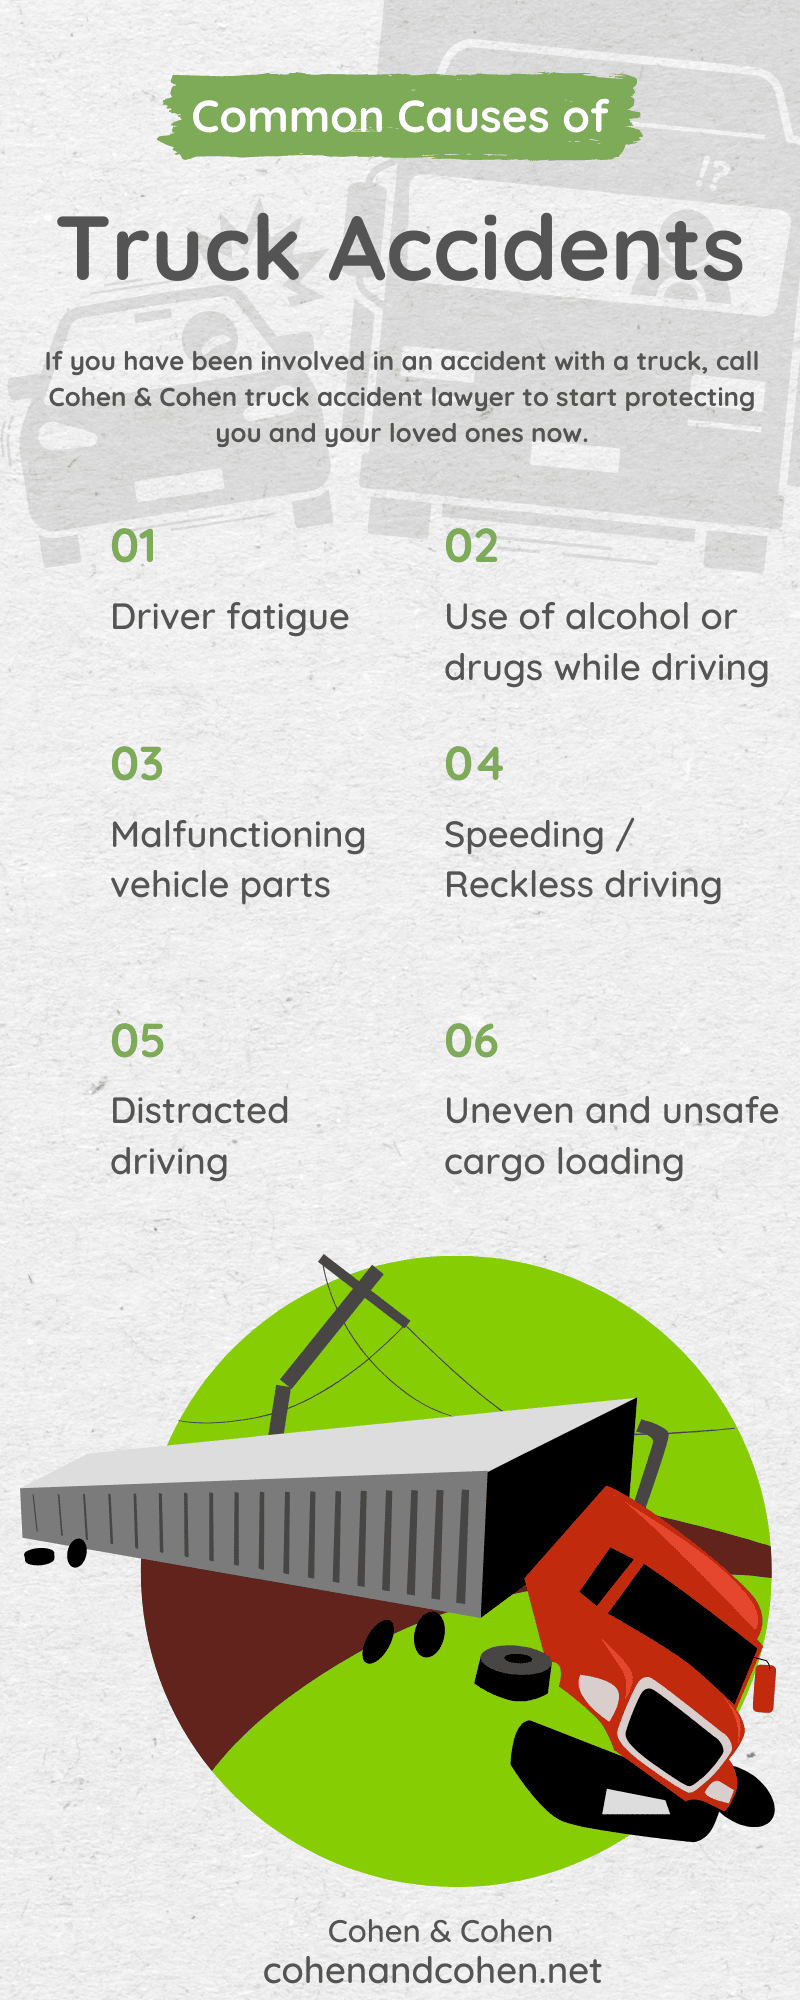 Common Causes of Truck Accidents Infographic